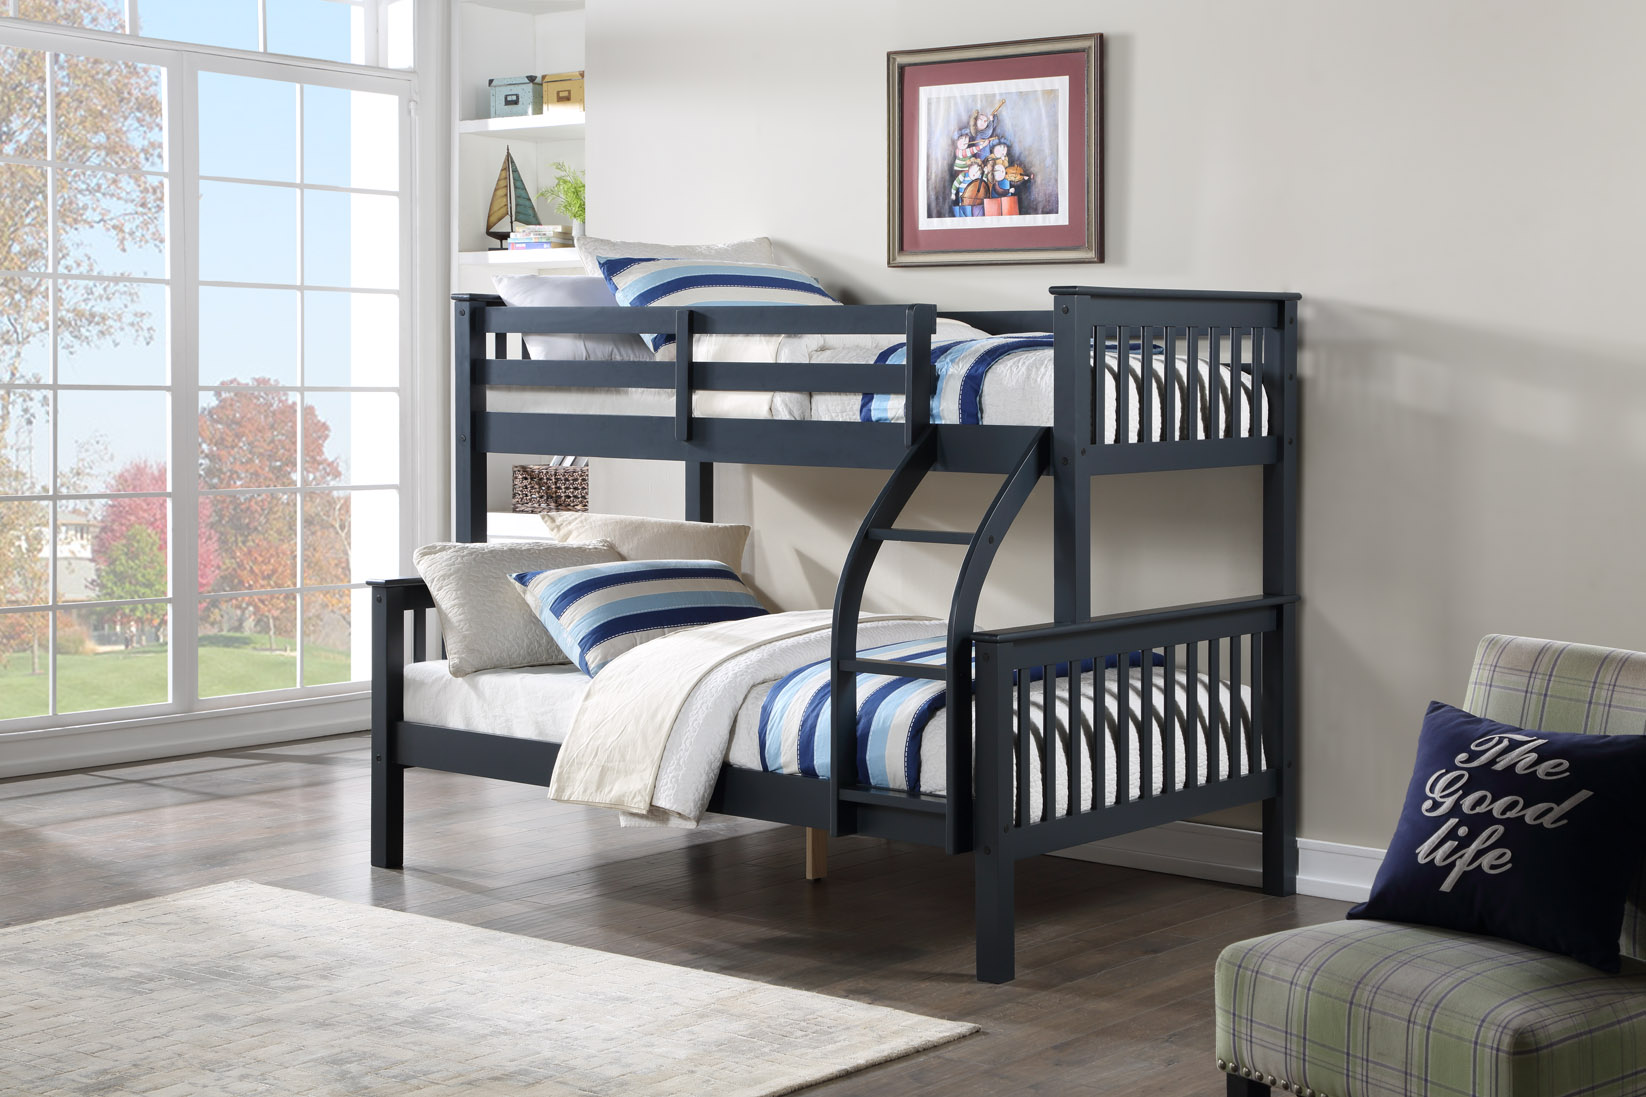 triple bunk beds with mattresses included